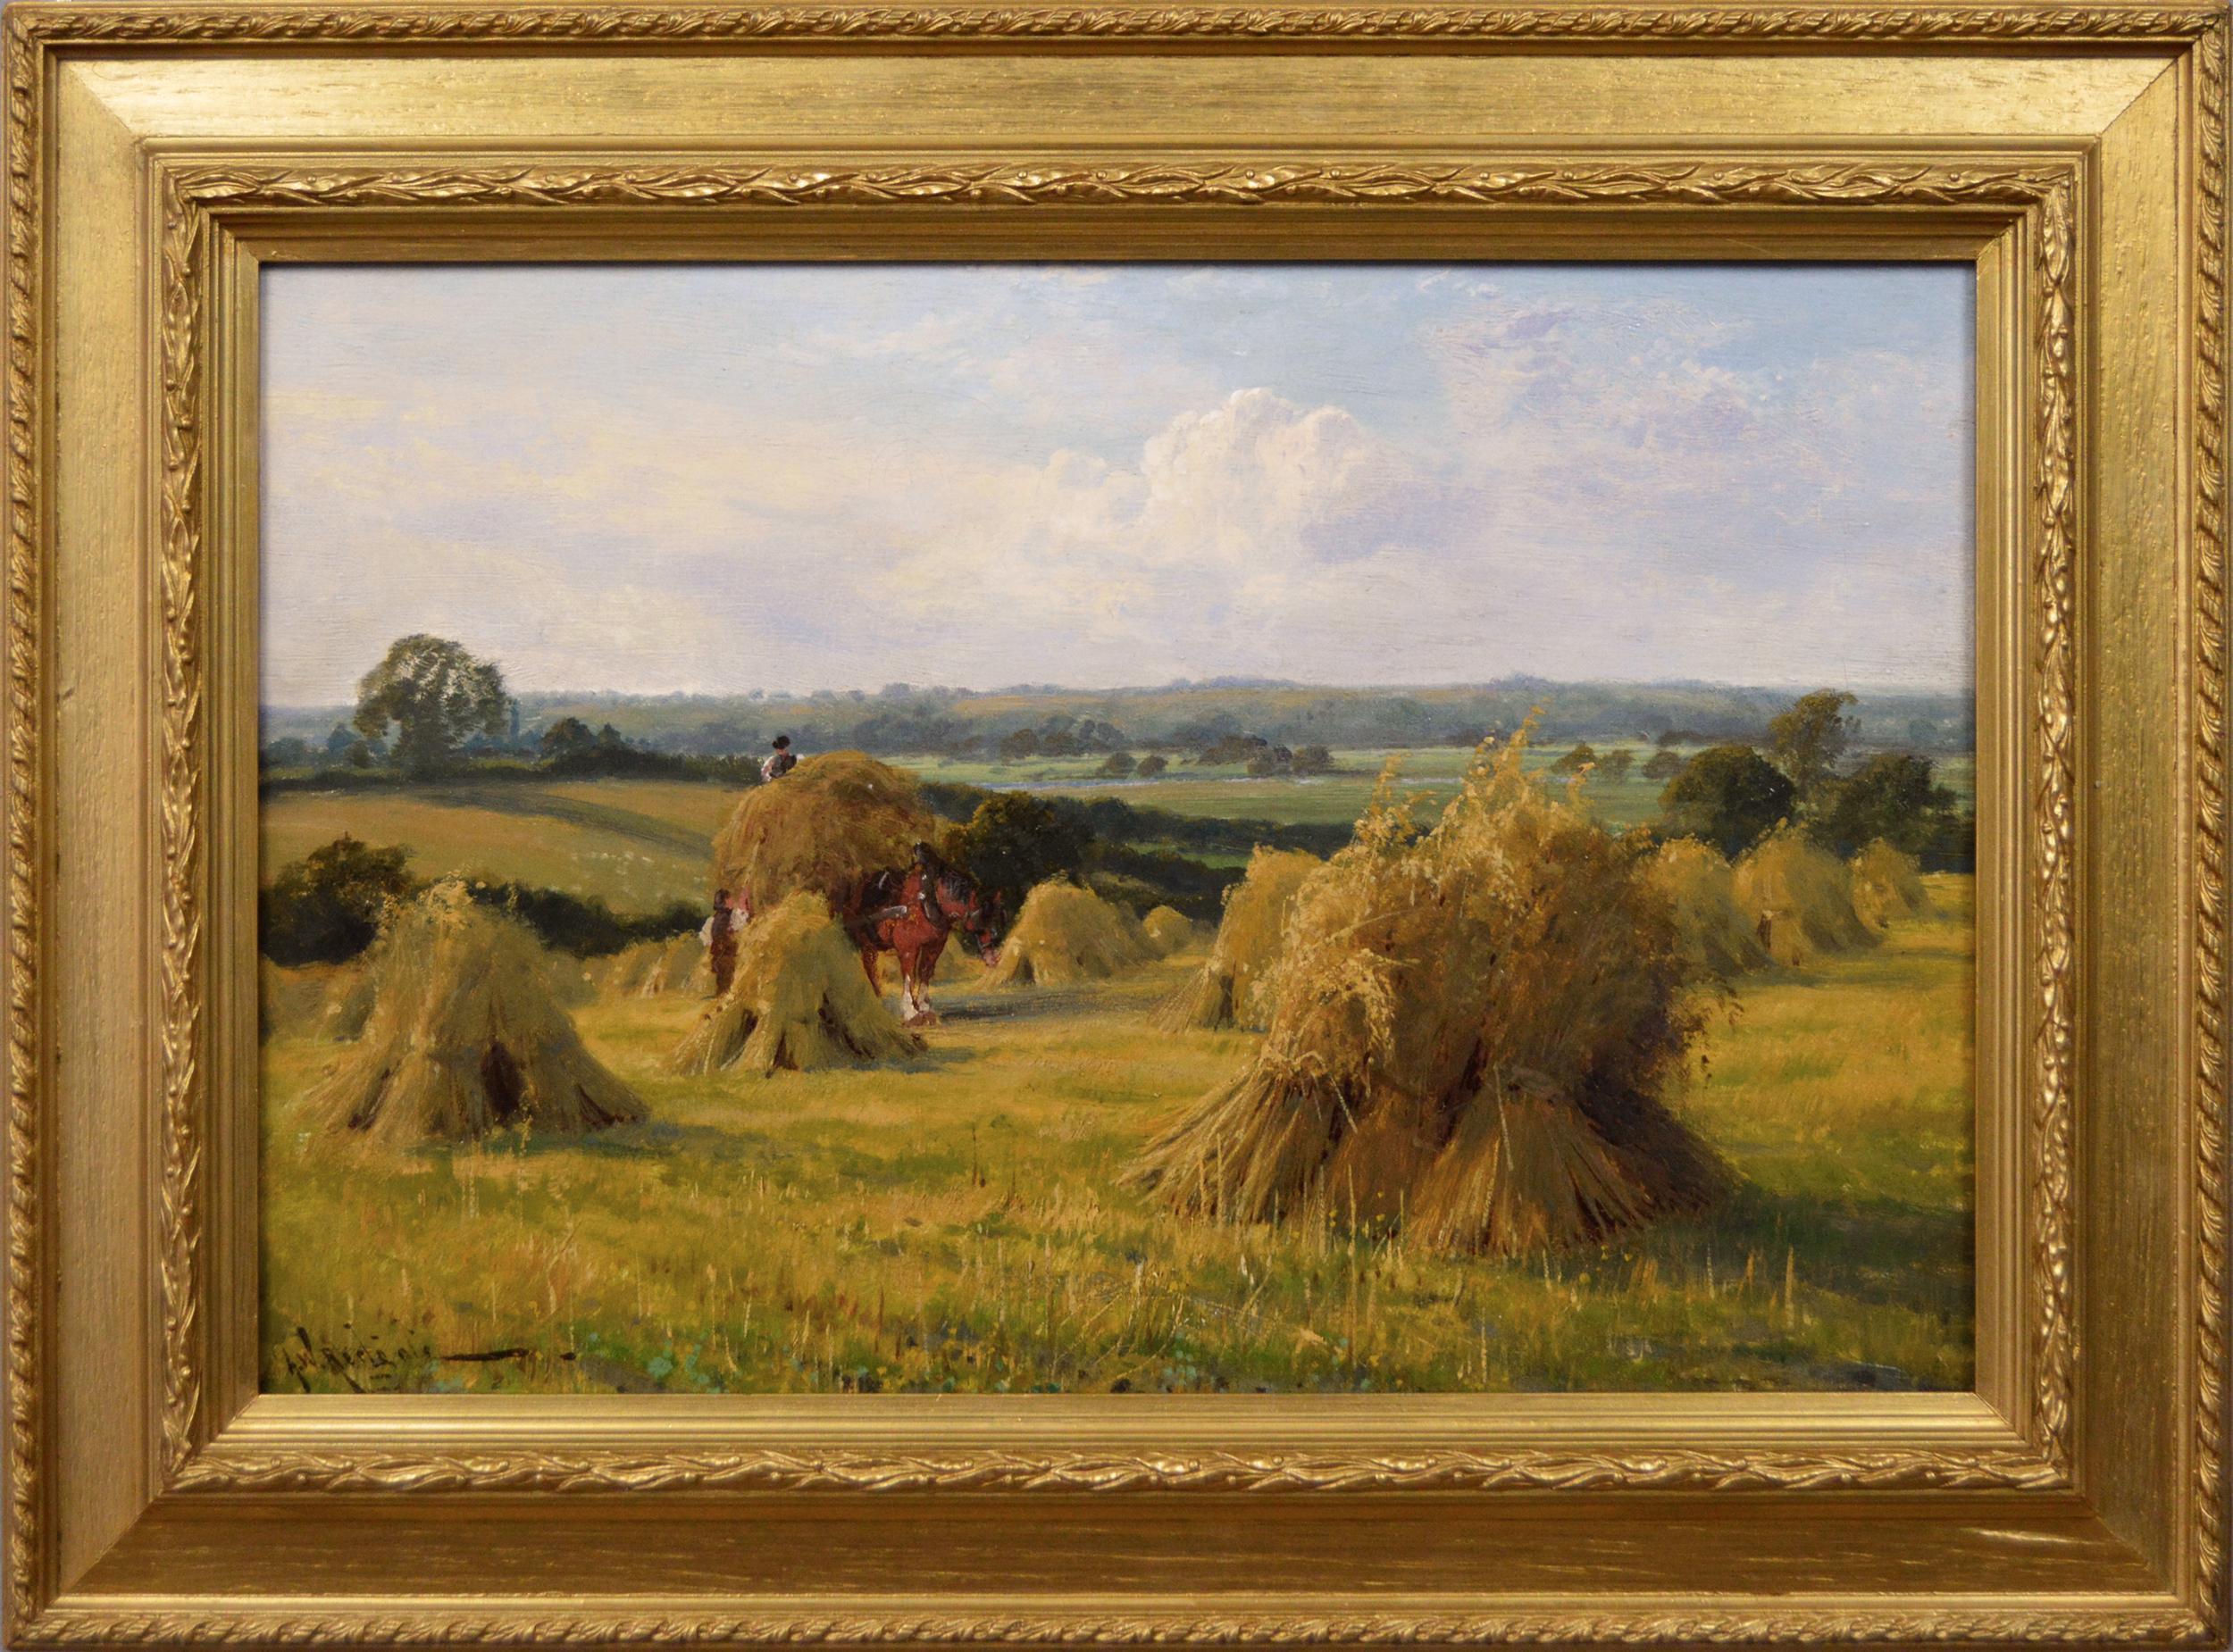 19th Century landscape oil painting of a harvest in the Trent Valley